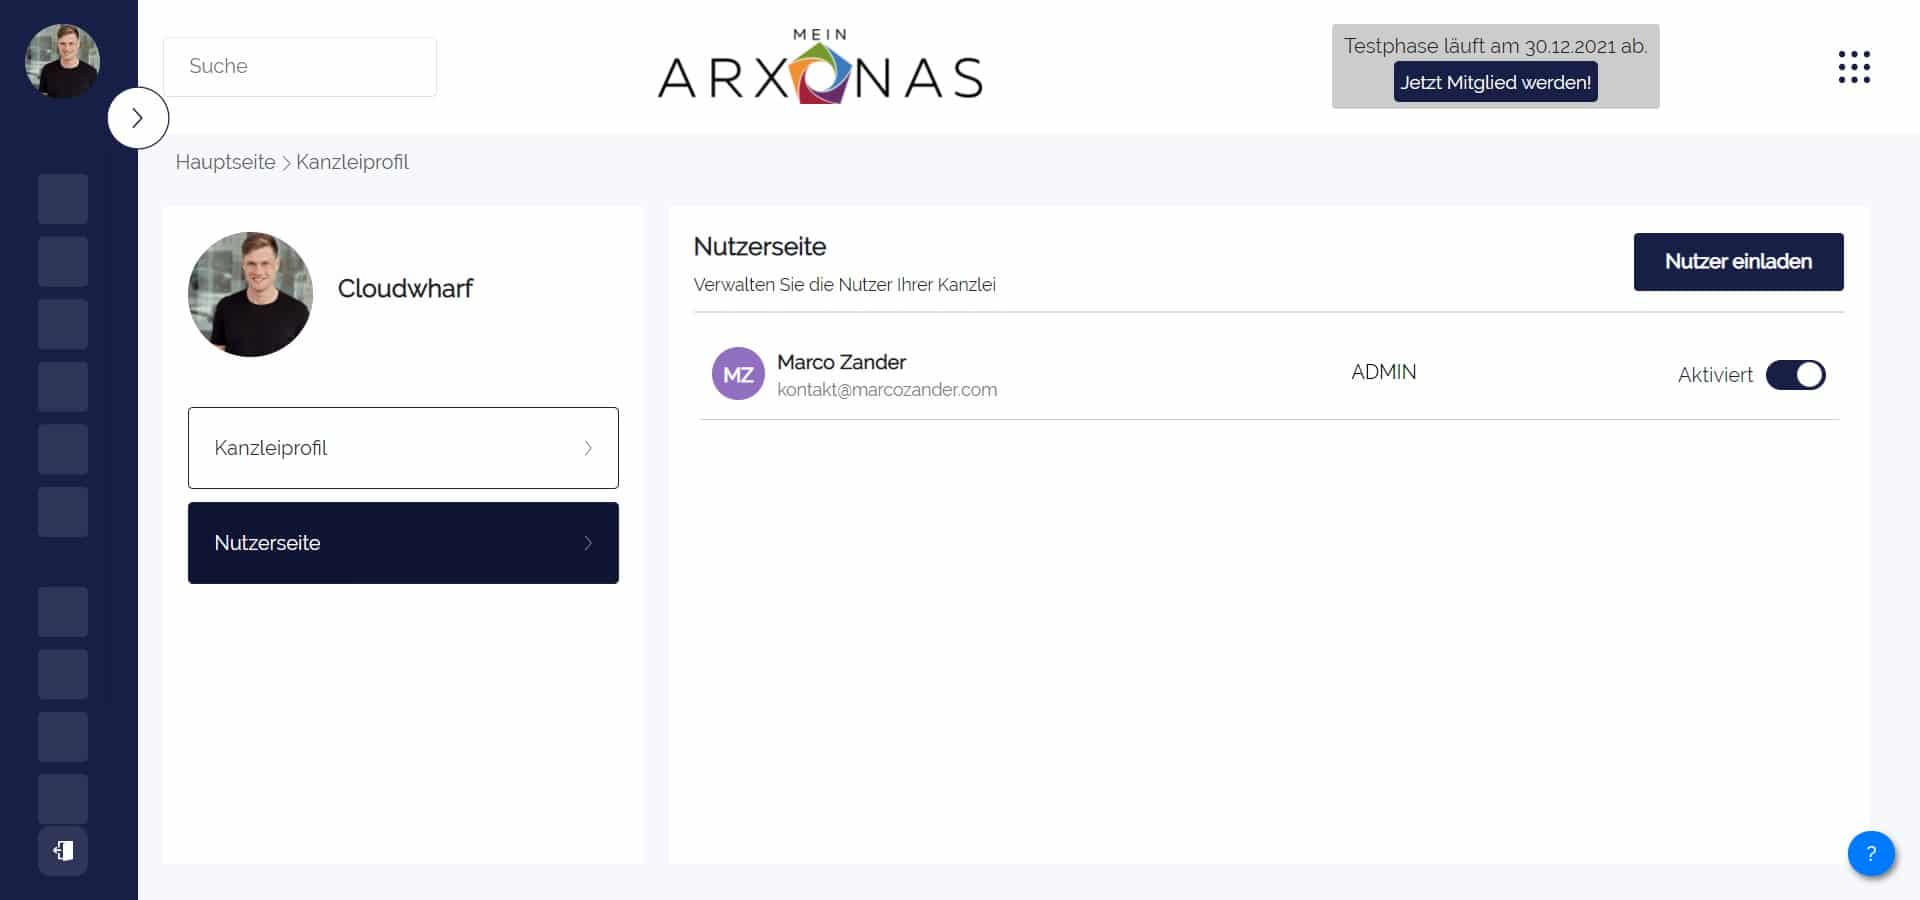 A screenshot from the Arxonas software - the user page.